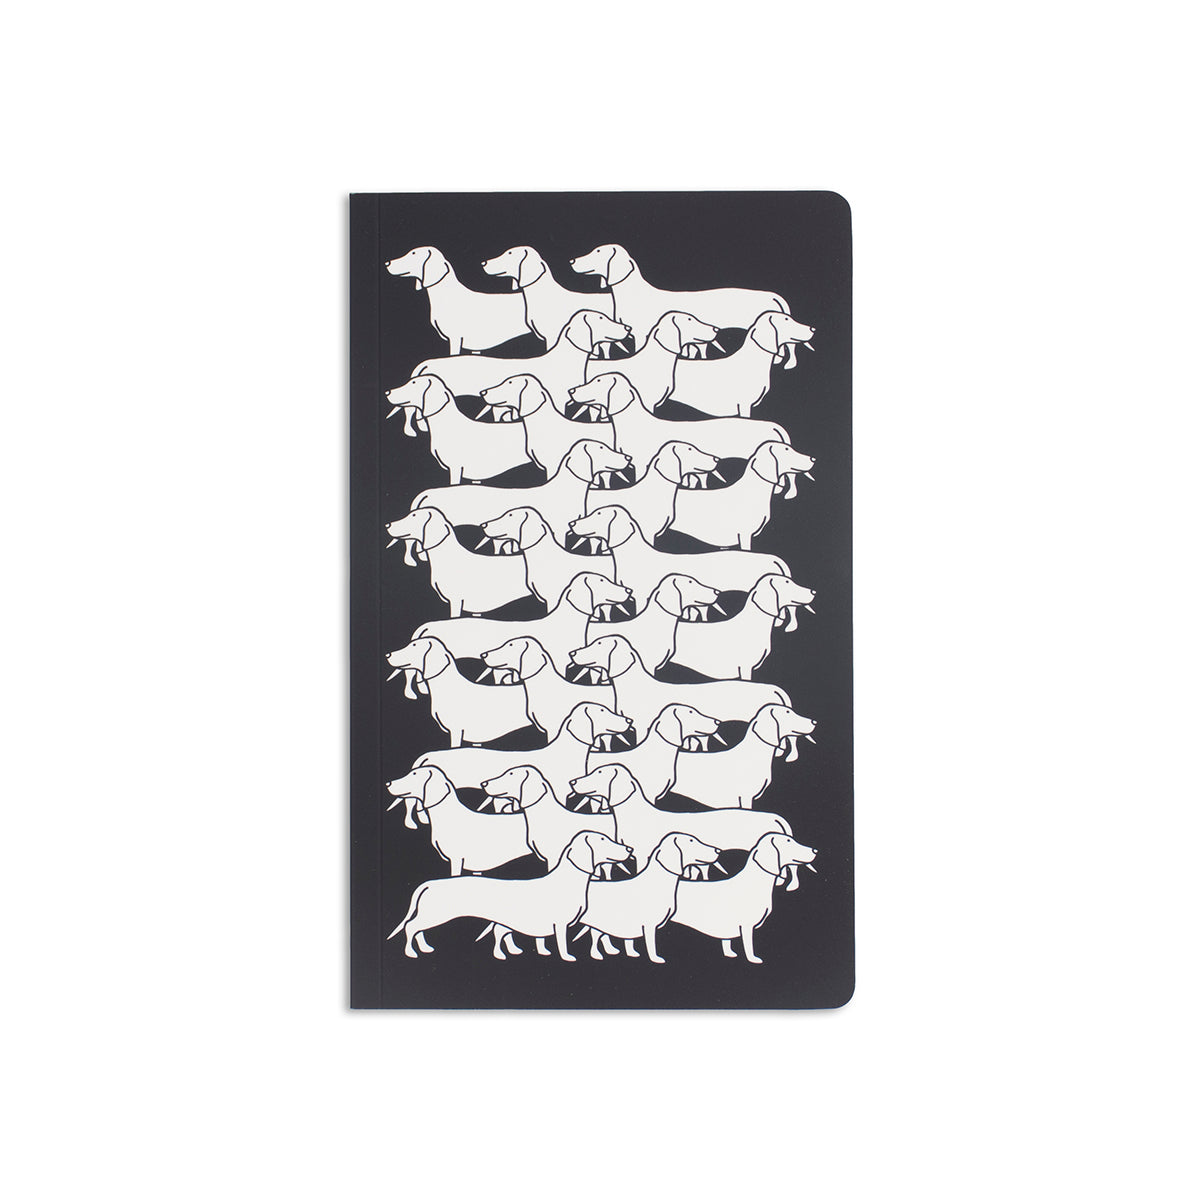 5" x 8.25" soft cover black notebook with 12 dachshund illustrations in a linear 3x3 grid pattern in white